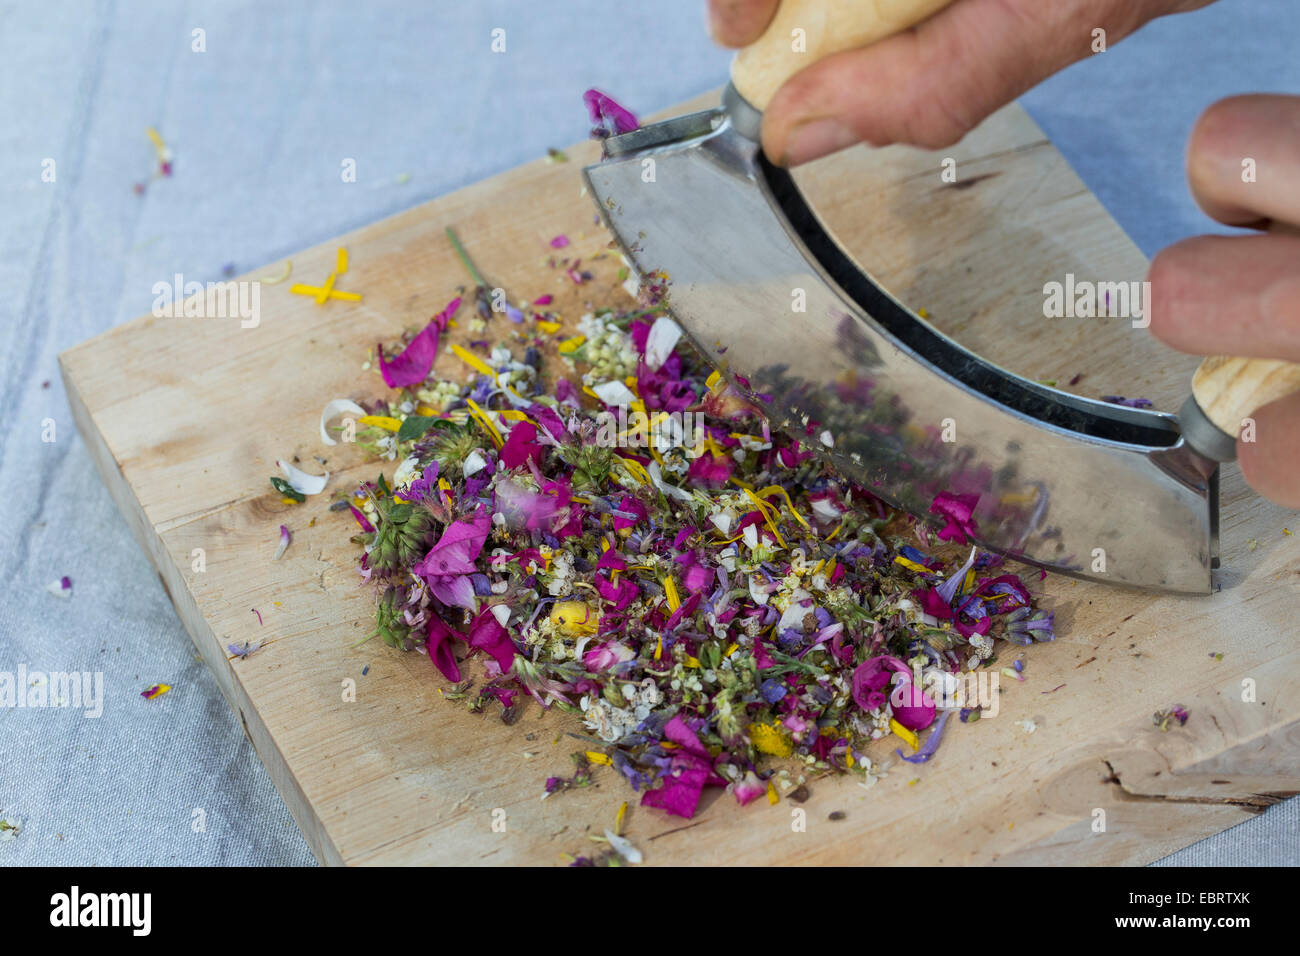 eatable petals are choped, Germany Stock Photo